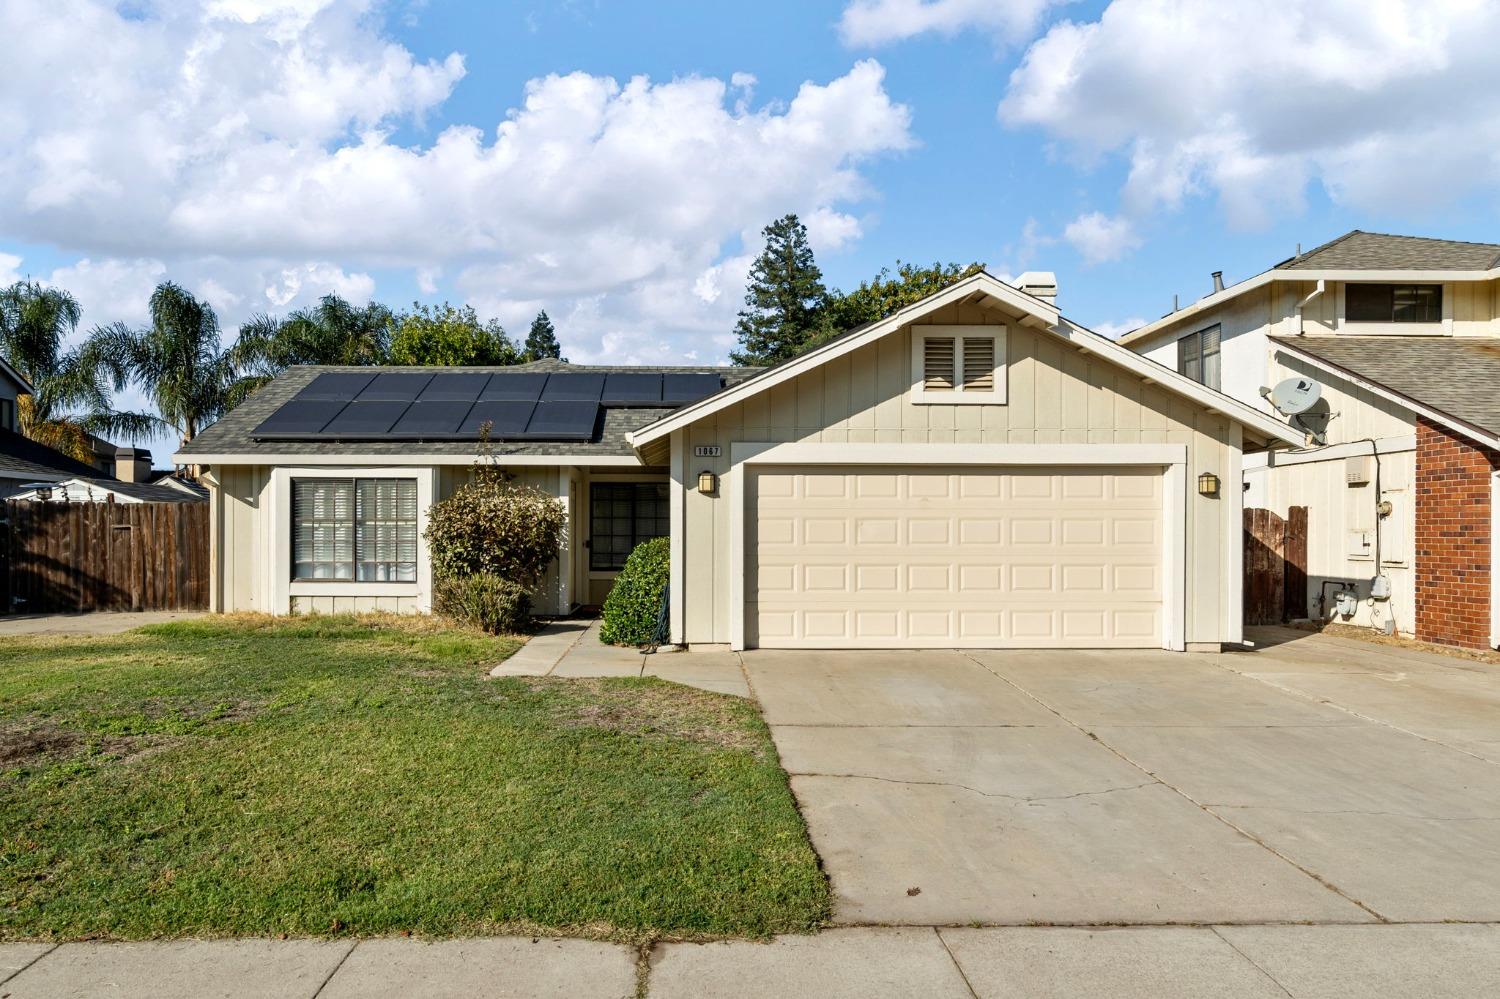 Photo of 1067 Winters Dr in Manteca, CA